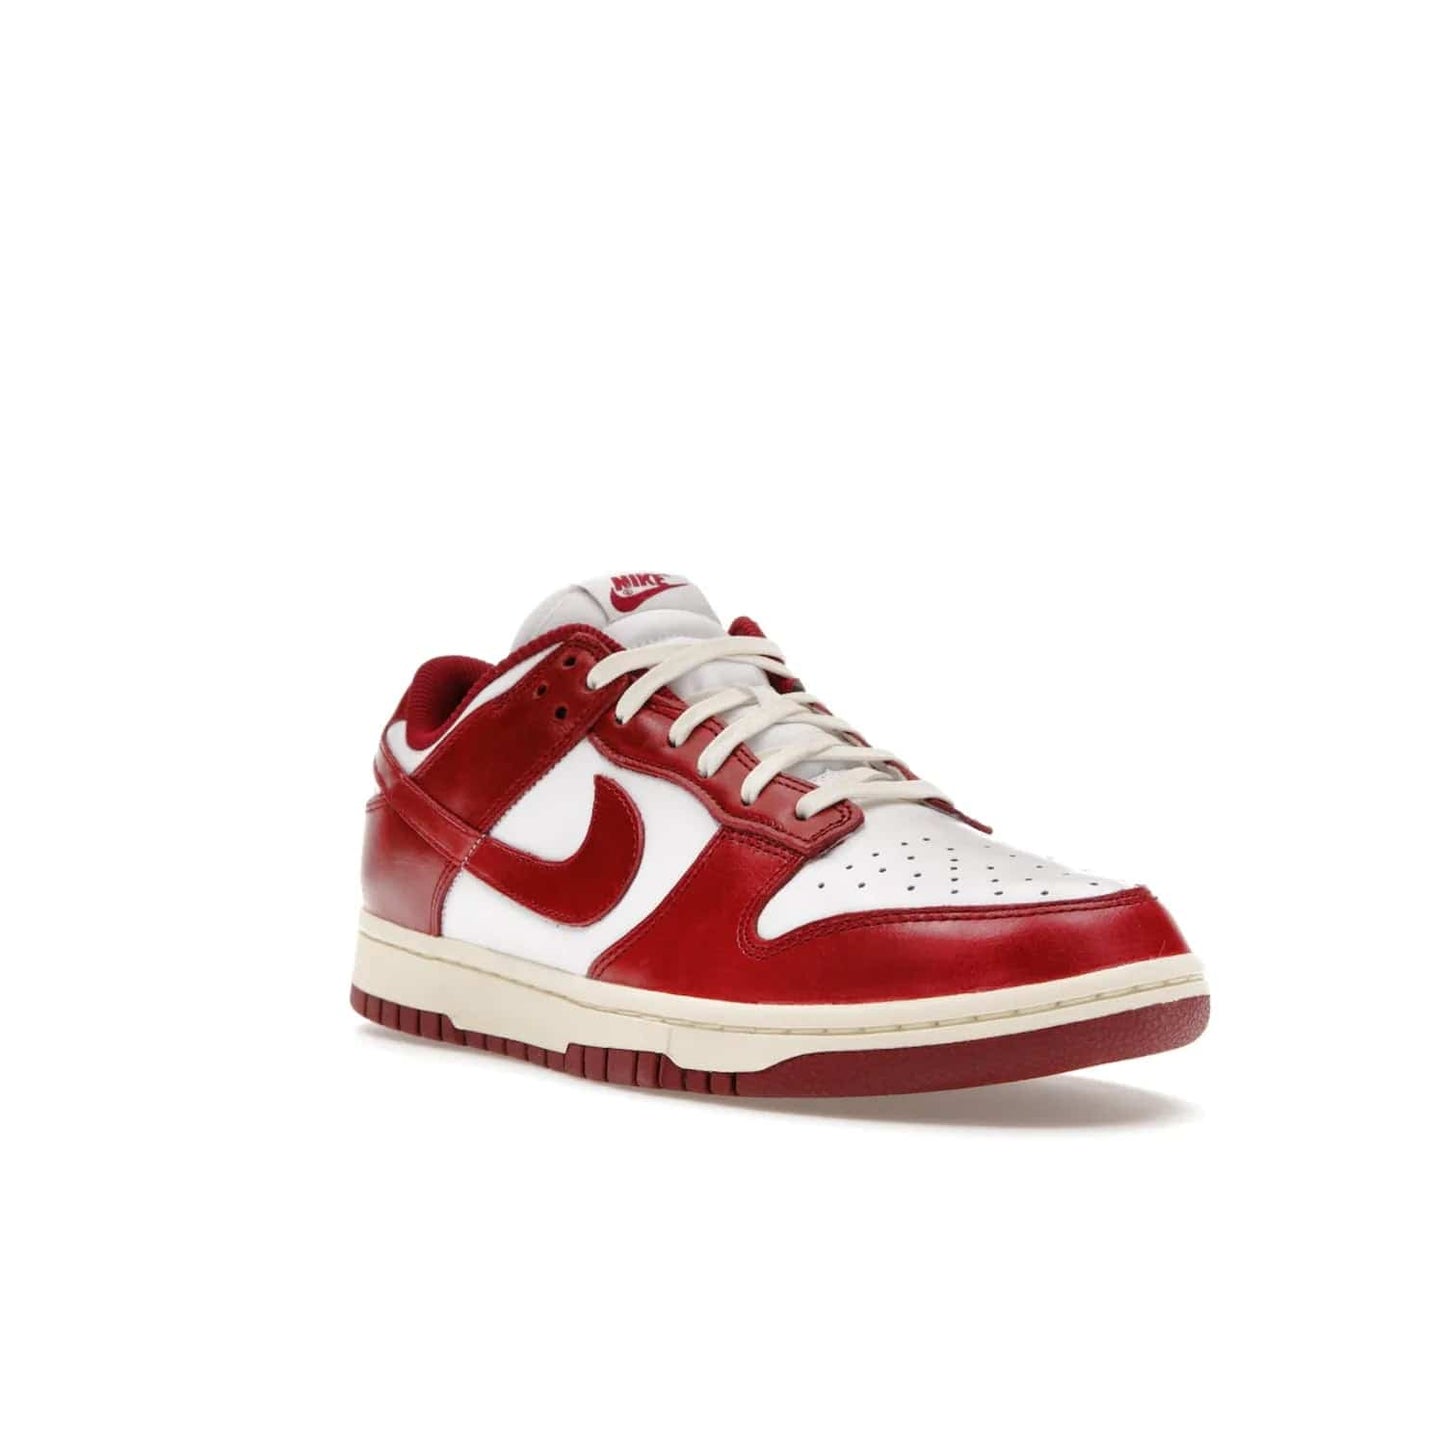 Nike Dunk Low PRM Vintage Team Red (Women's) - Image 6 - Only at www.BallersClubKickz.com - Shop the stylish Nike Dunk Low PRM Vintage Team Red. Signature Red and White leather with Coconut Milk midsoles for an aged finish. 21 April 2023 release.